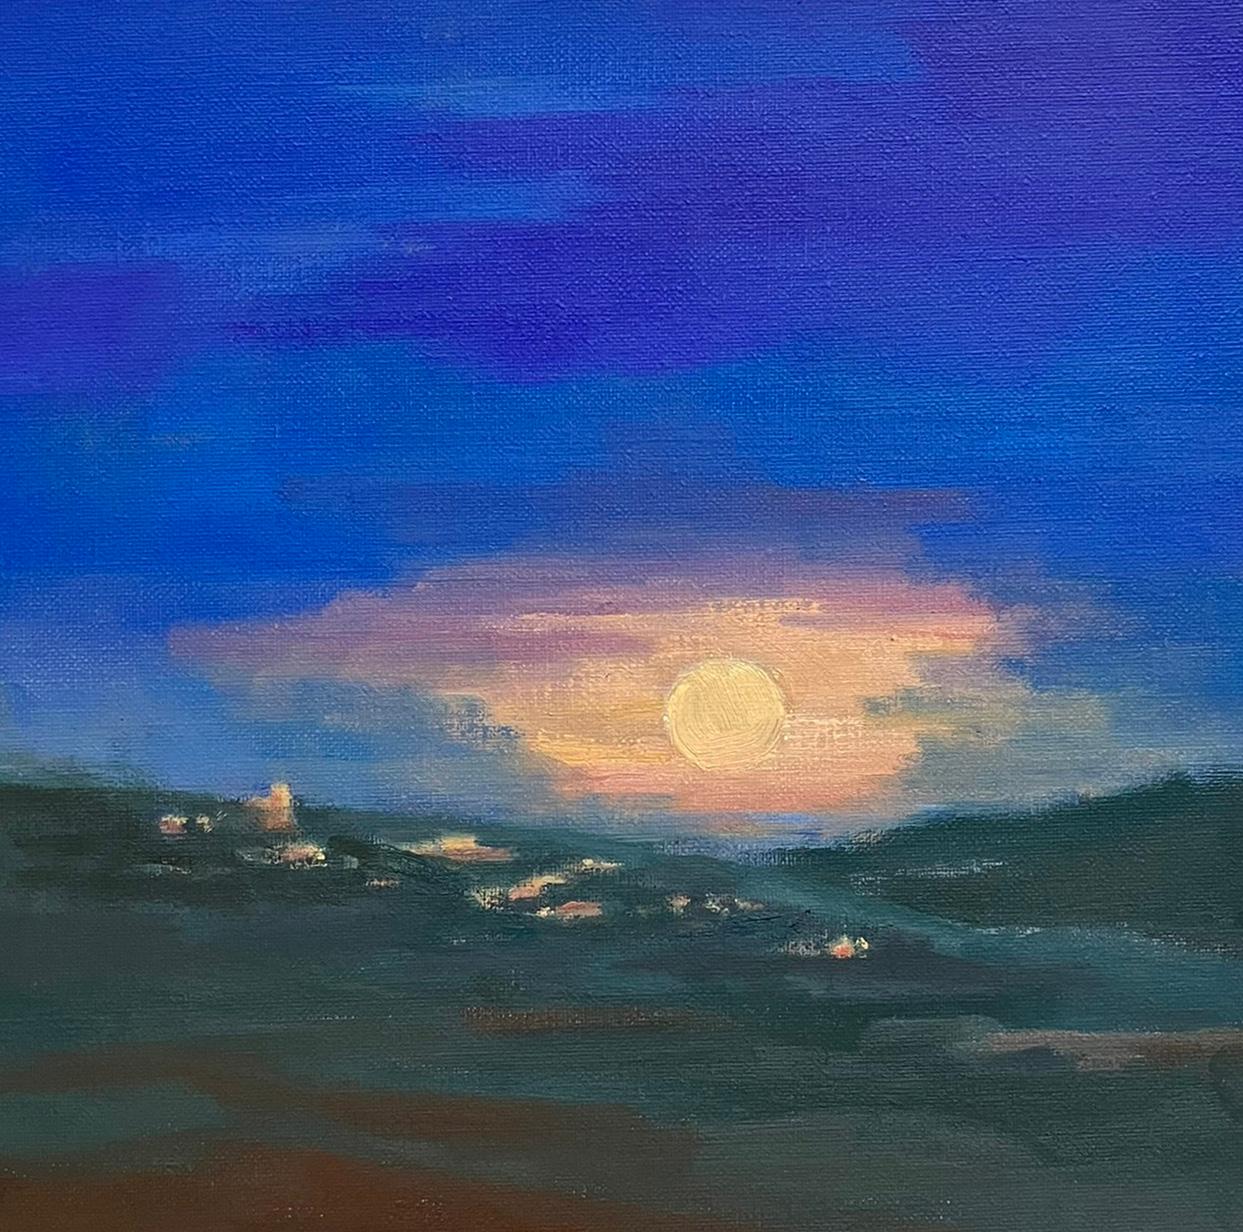 Stawberry Super Moon by Lesley Powell, Square Oil on Canvas Landscape Painting